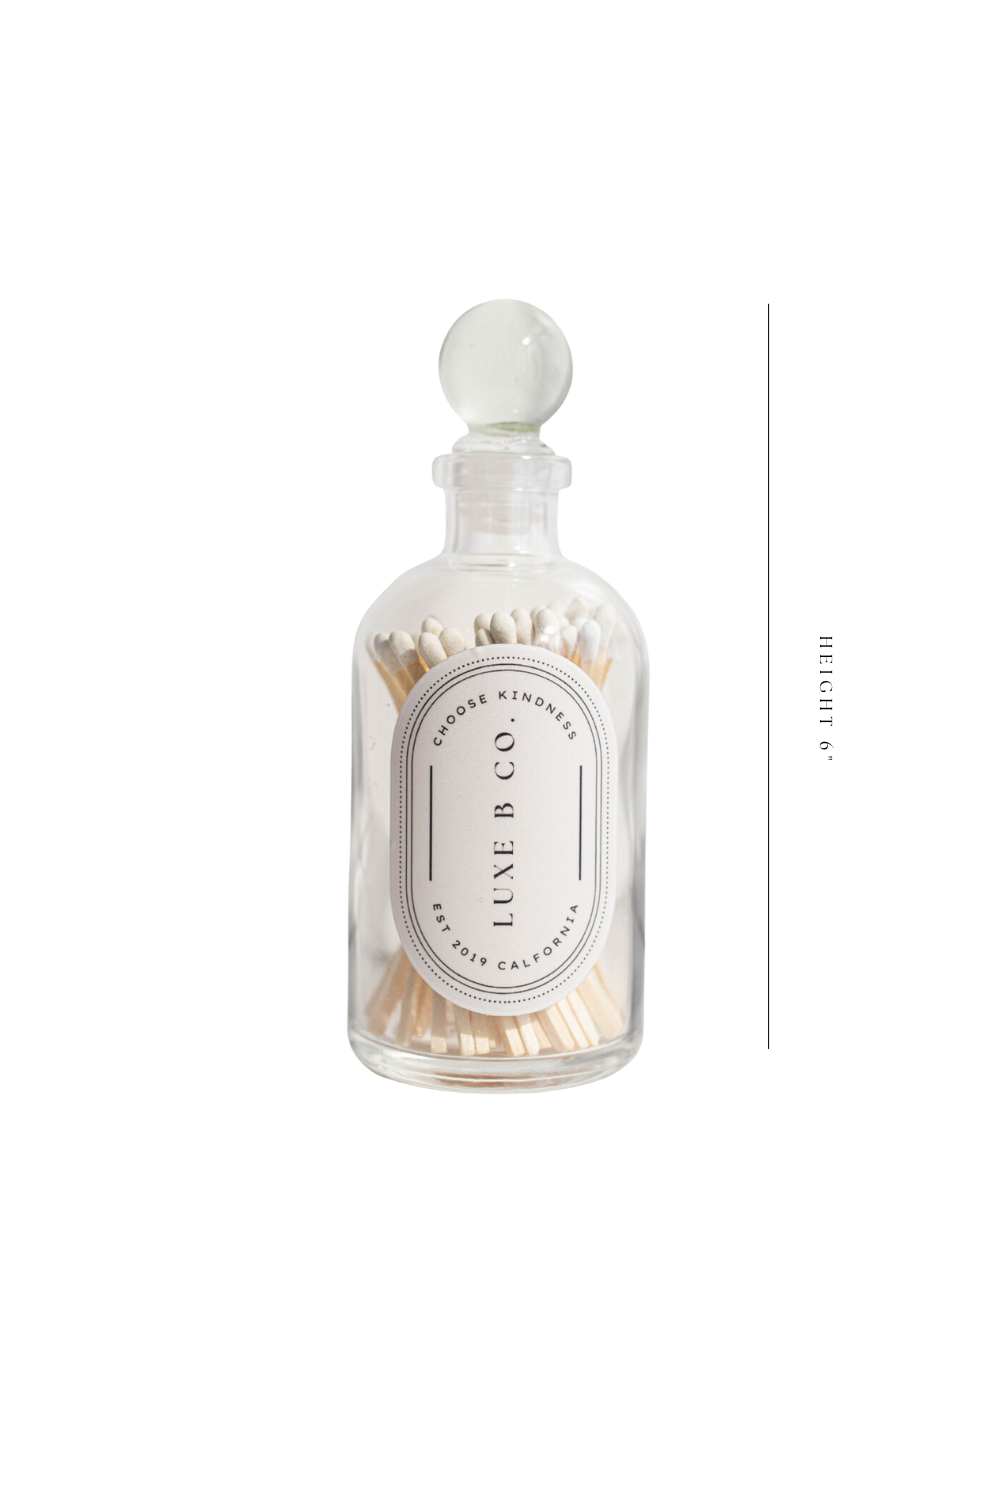 Match Bottles White by Luxe B Co. - Luxe B Co